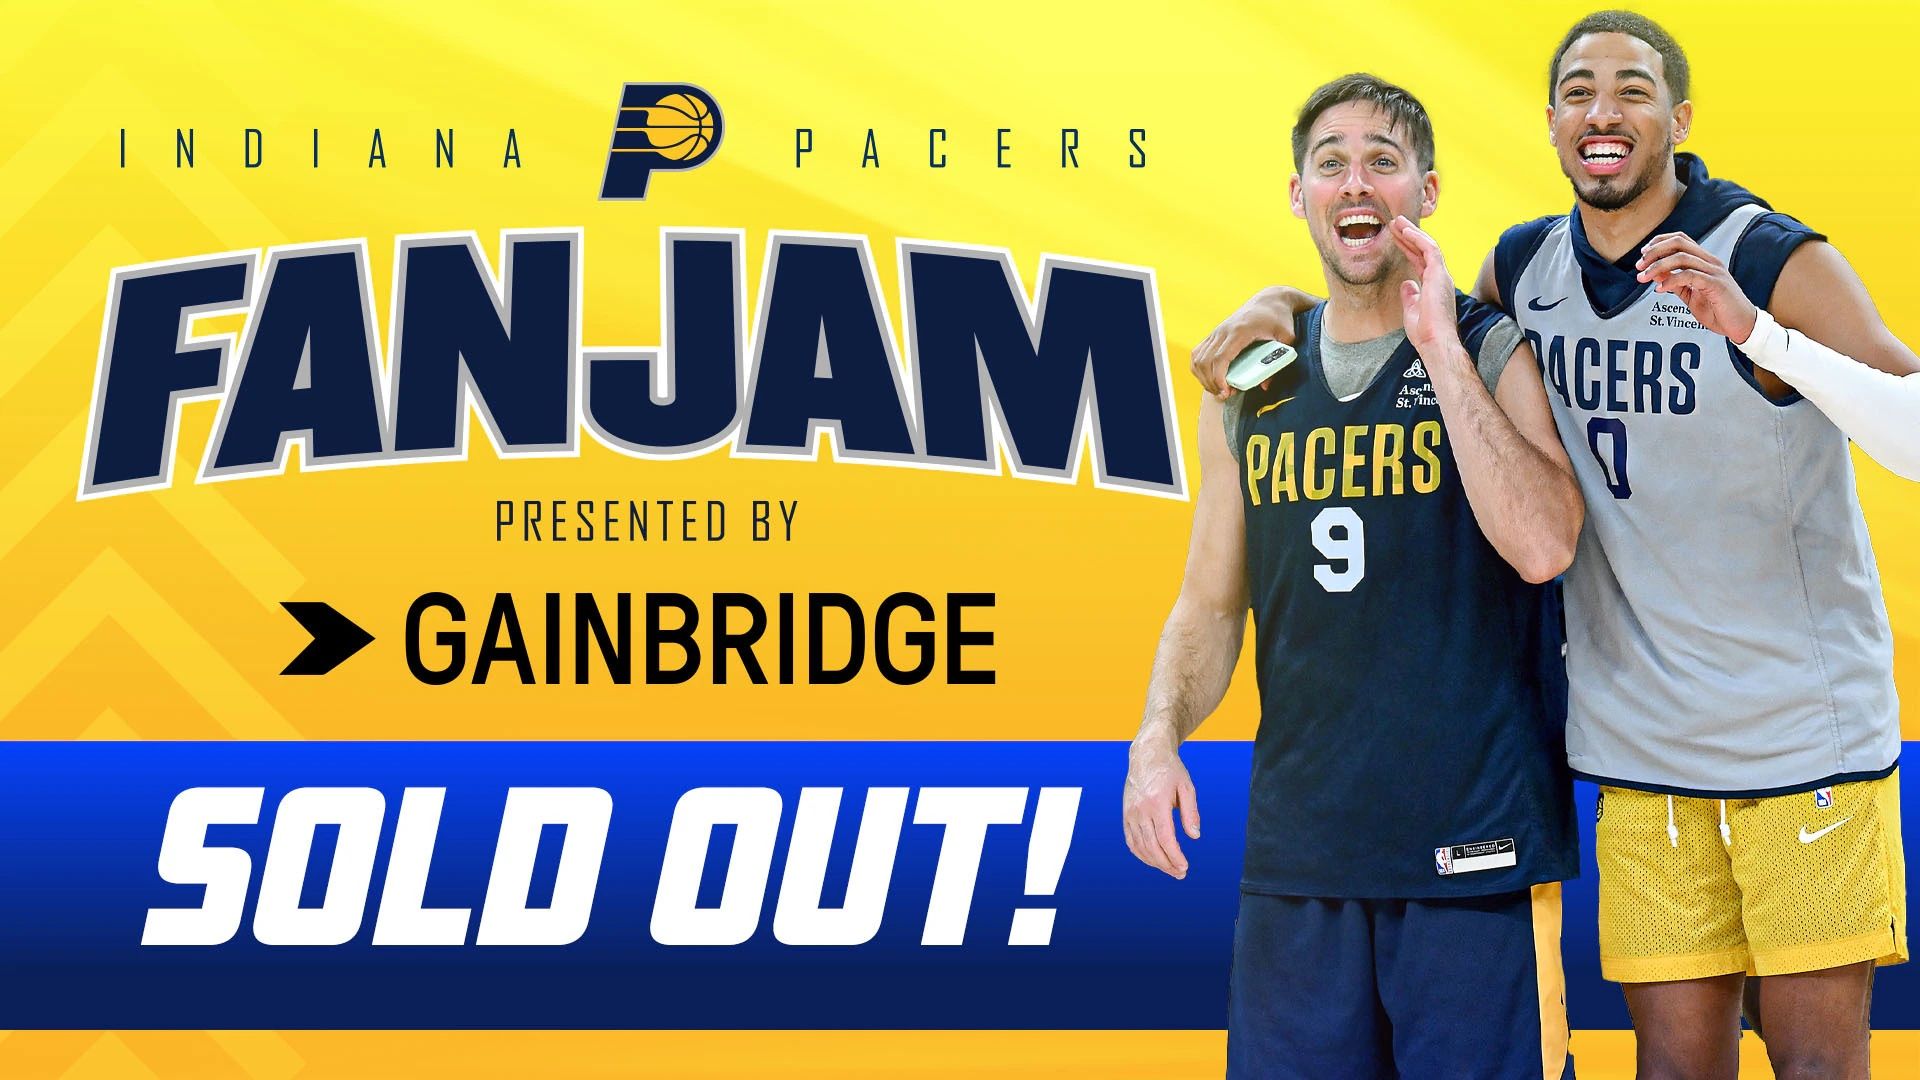 FanJam Tickets Indiana Pacers 